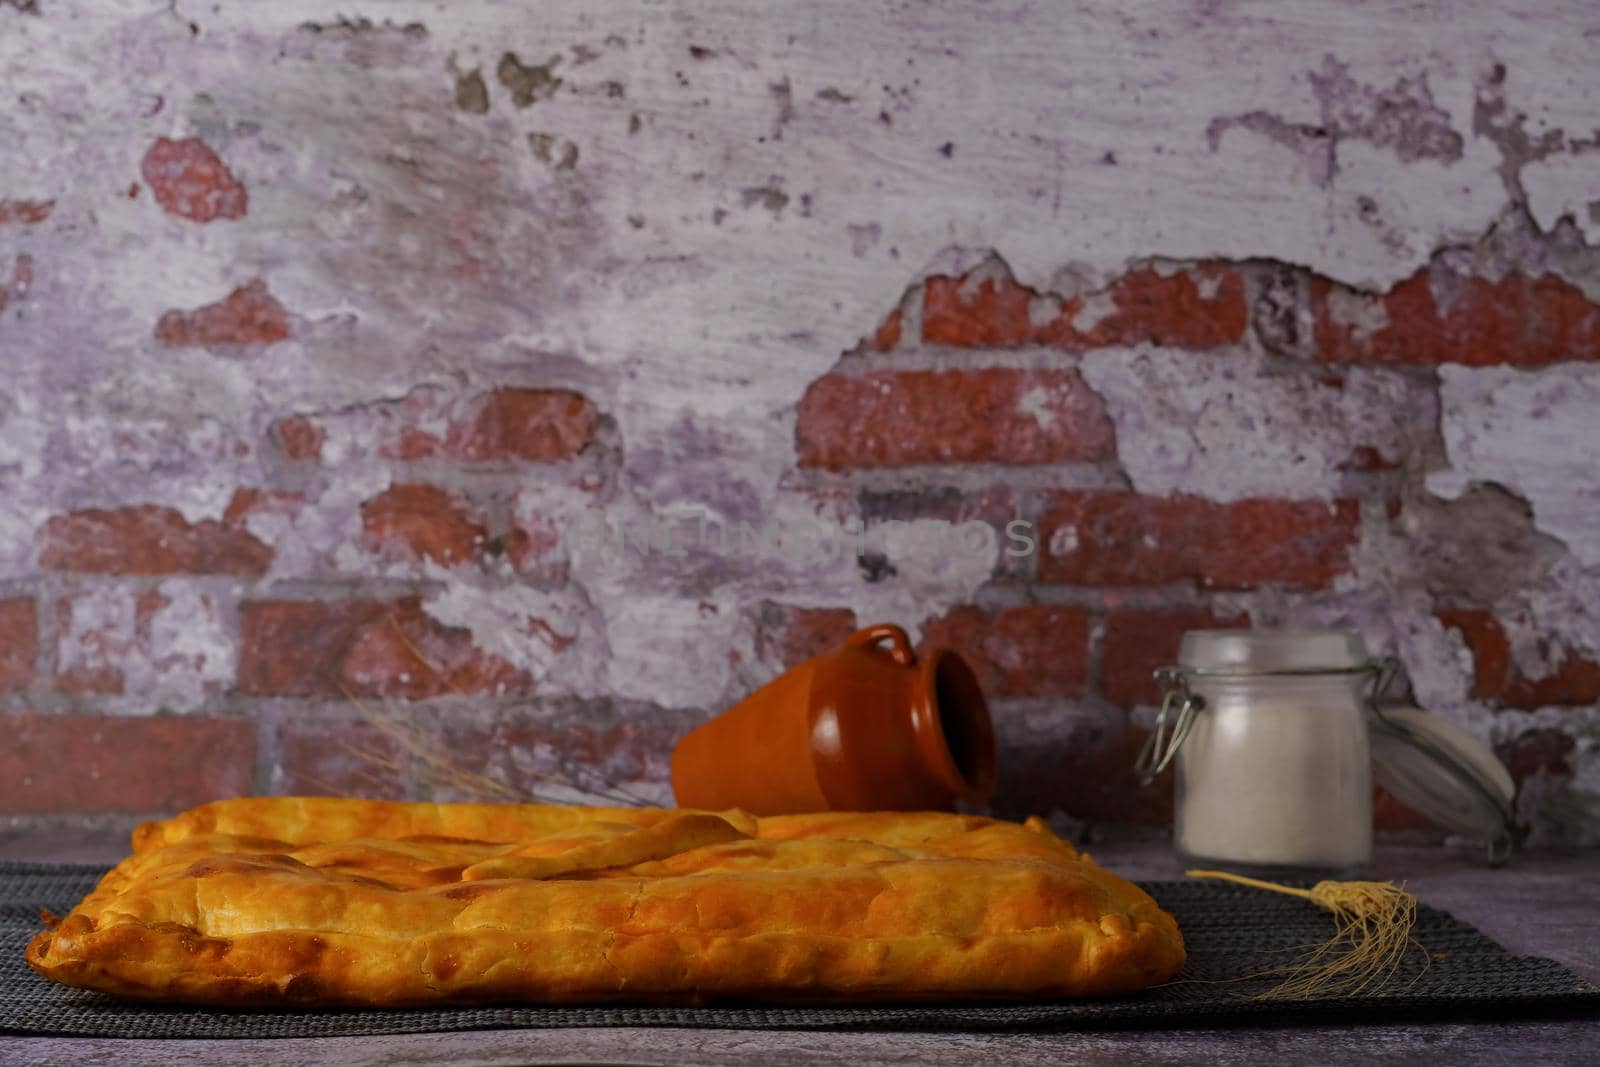 tuna pie with flour jar and earthenware jar in the background a red brick wall